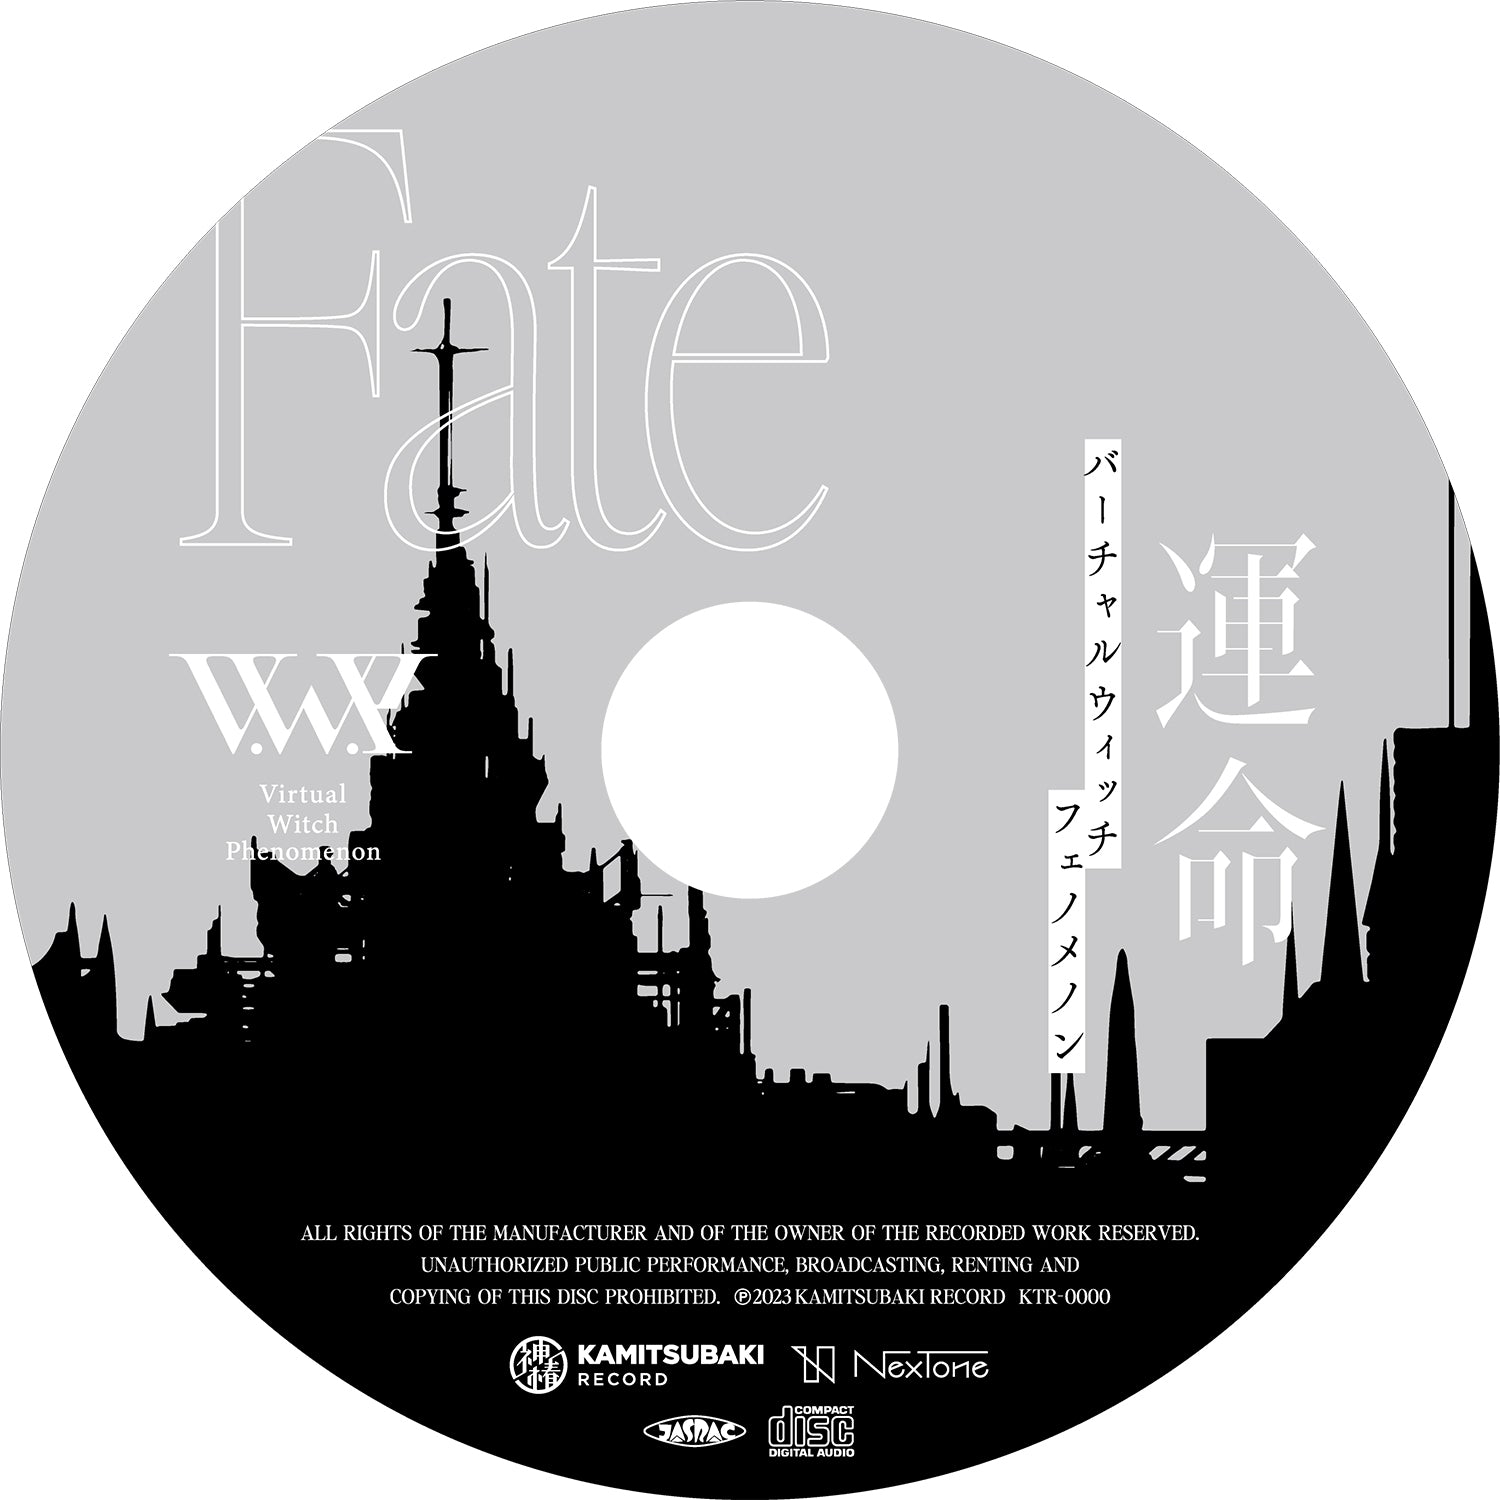 V.W.P】「運命」SPECIAL BOX／1st ALBUM「運命」 – FINDME STORE by THINKR